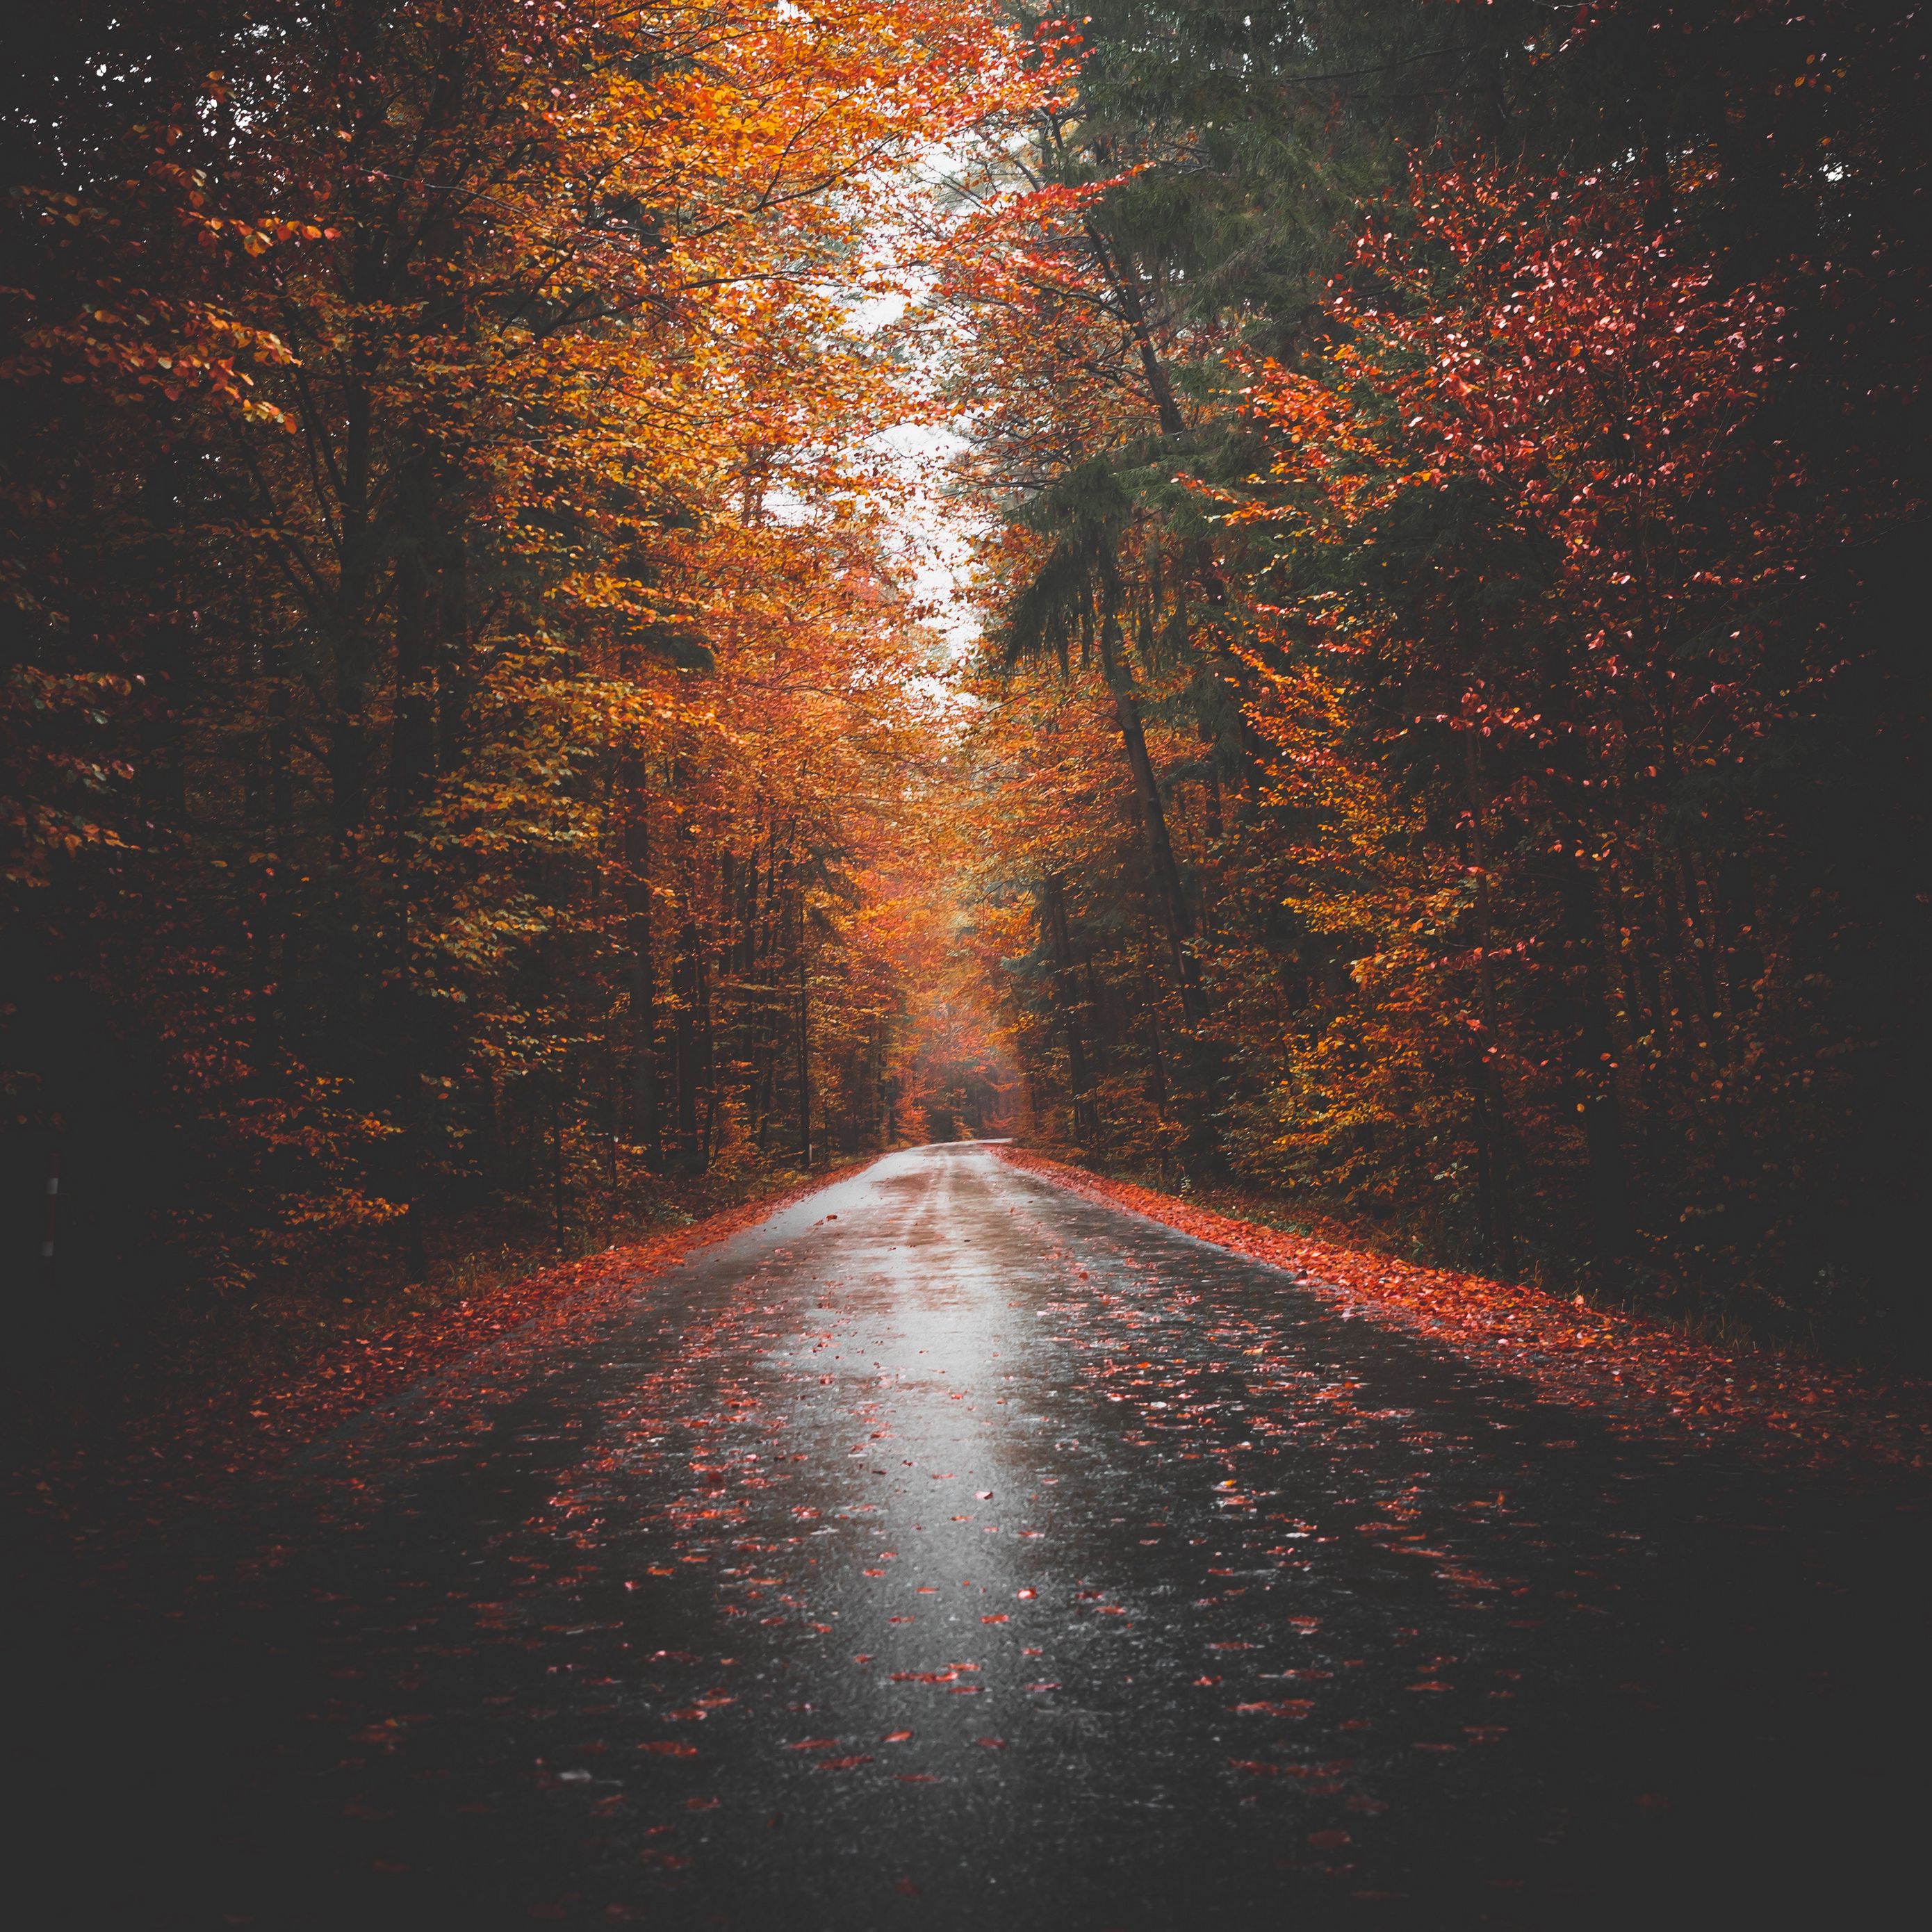 Download wallpaper 2780x2780 autumn, road, trees, forest, asphalt ipad air, ipad air ipad ipad ipad mini ipad mini ipad mini ipad pro 9.7 for parallax HD background